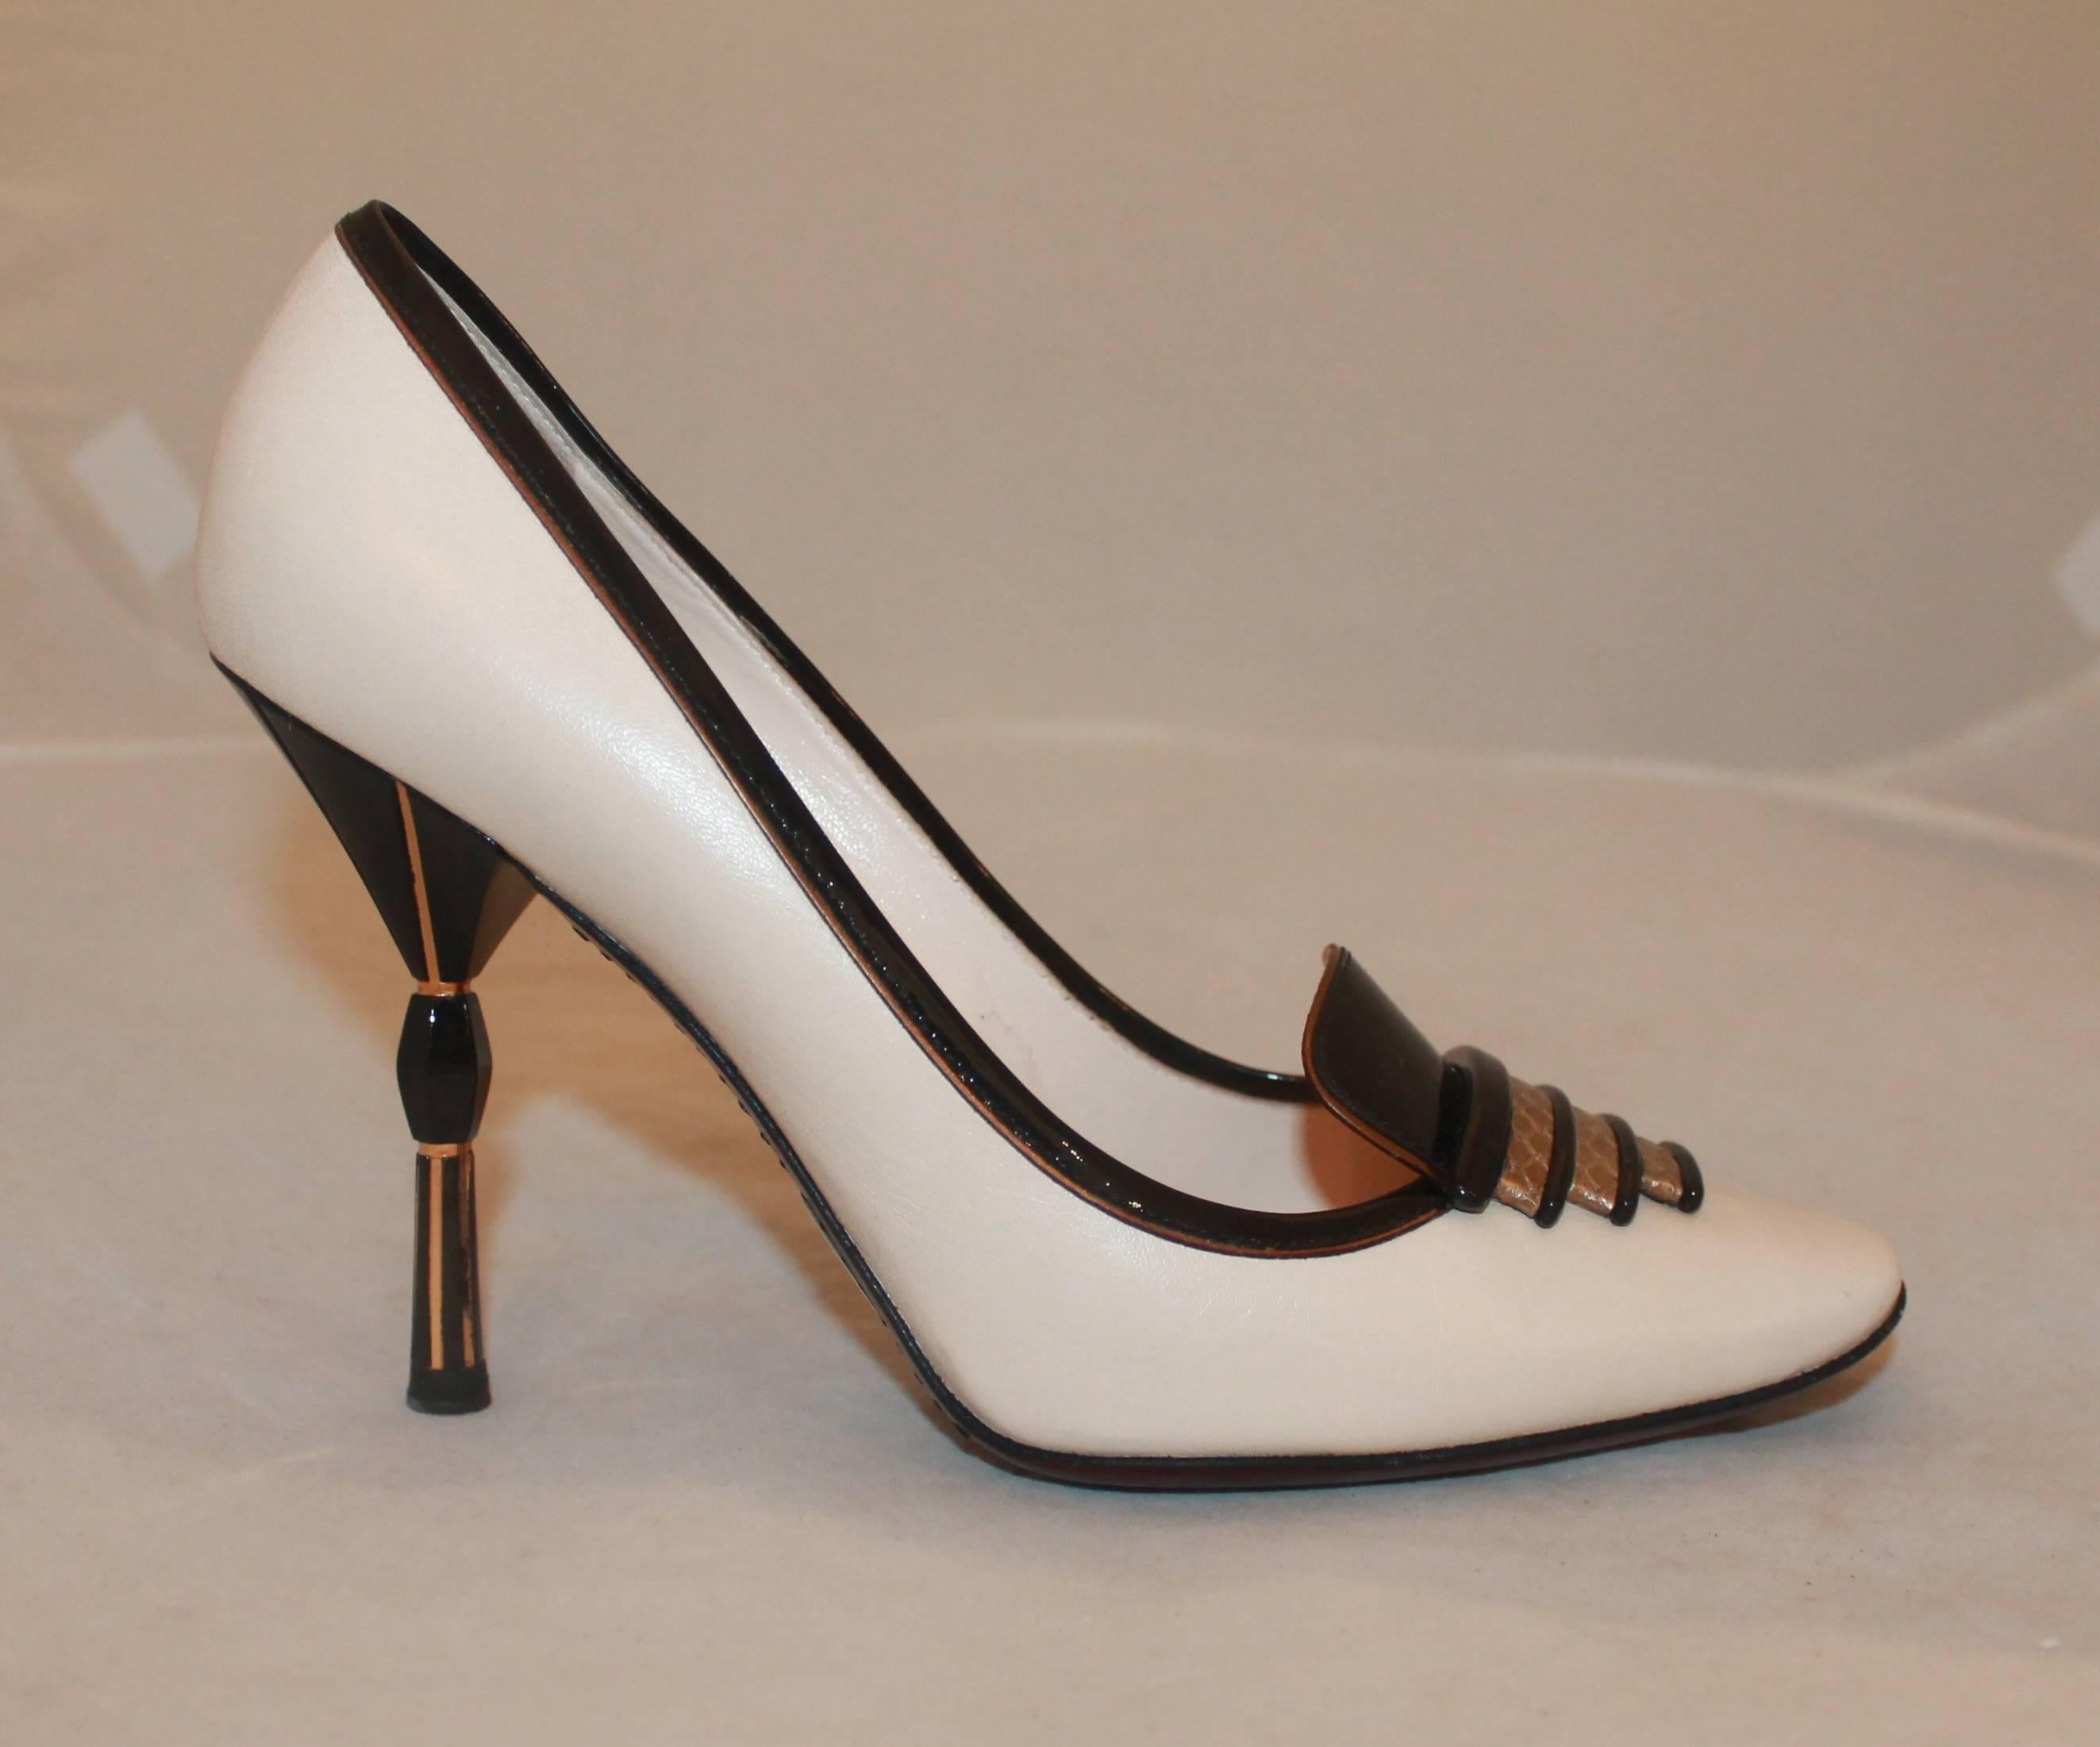 Louis Vuitton Limited Edition Art Deco Black, Ivory, and Gold Pumps - 38. These Louis Vuitton limed edition pumps are Art Deco style and are patent leather with a gold pendant int he front. The heel is black enamel with gold and are in excellent